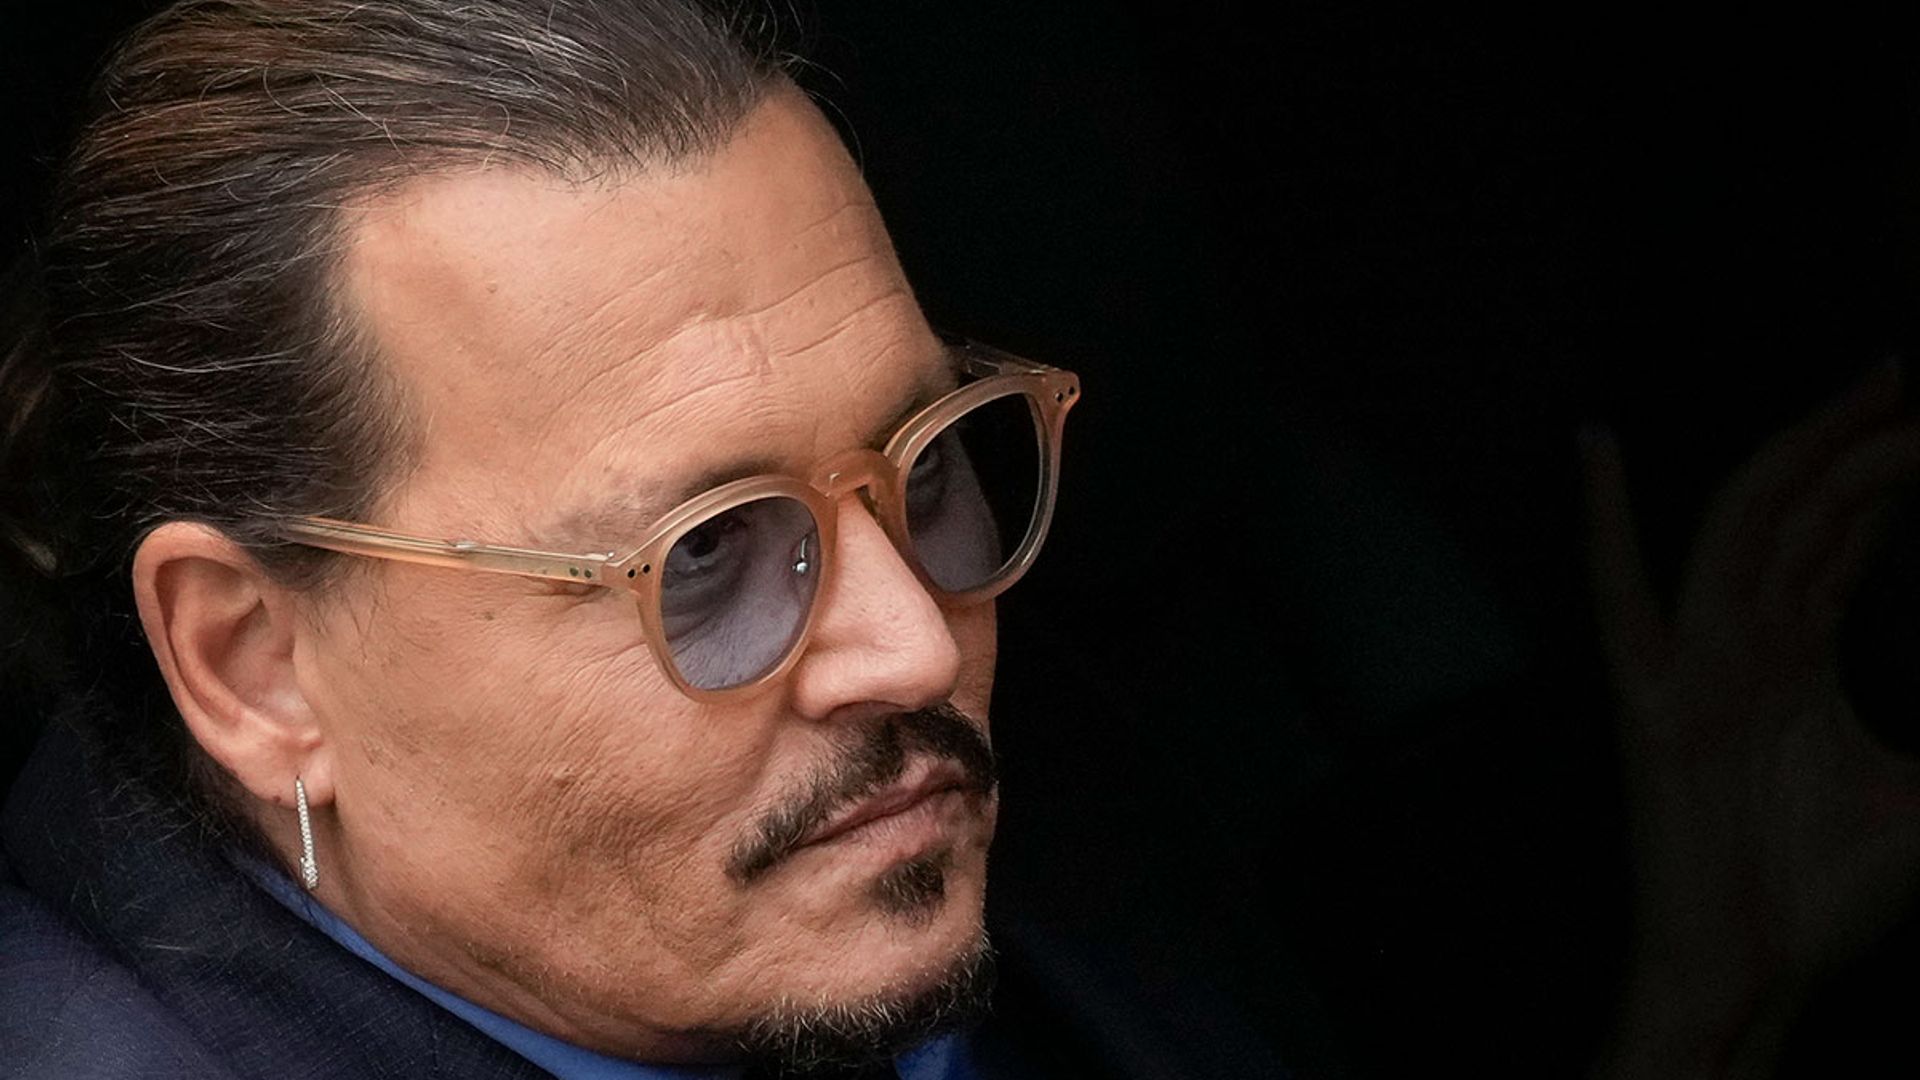 Johnny Depp surprises fans with exciting news following Amber Heard lawsuit win